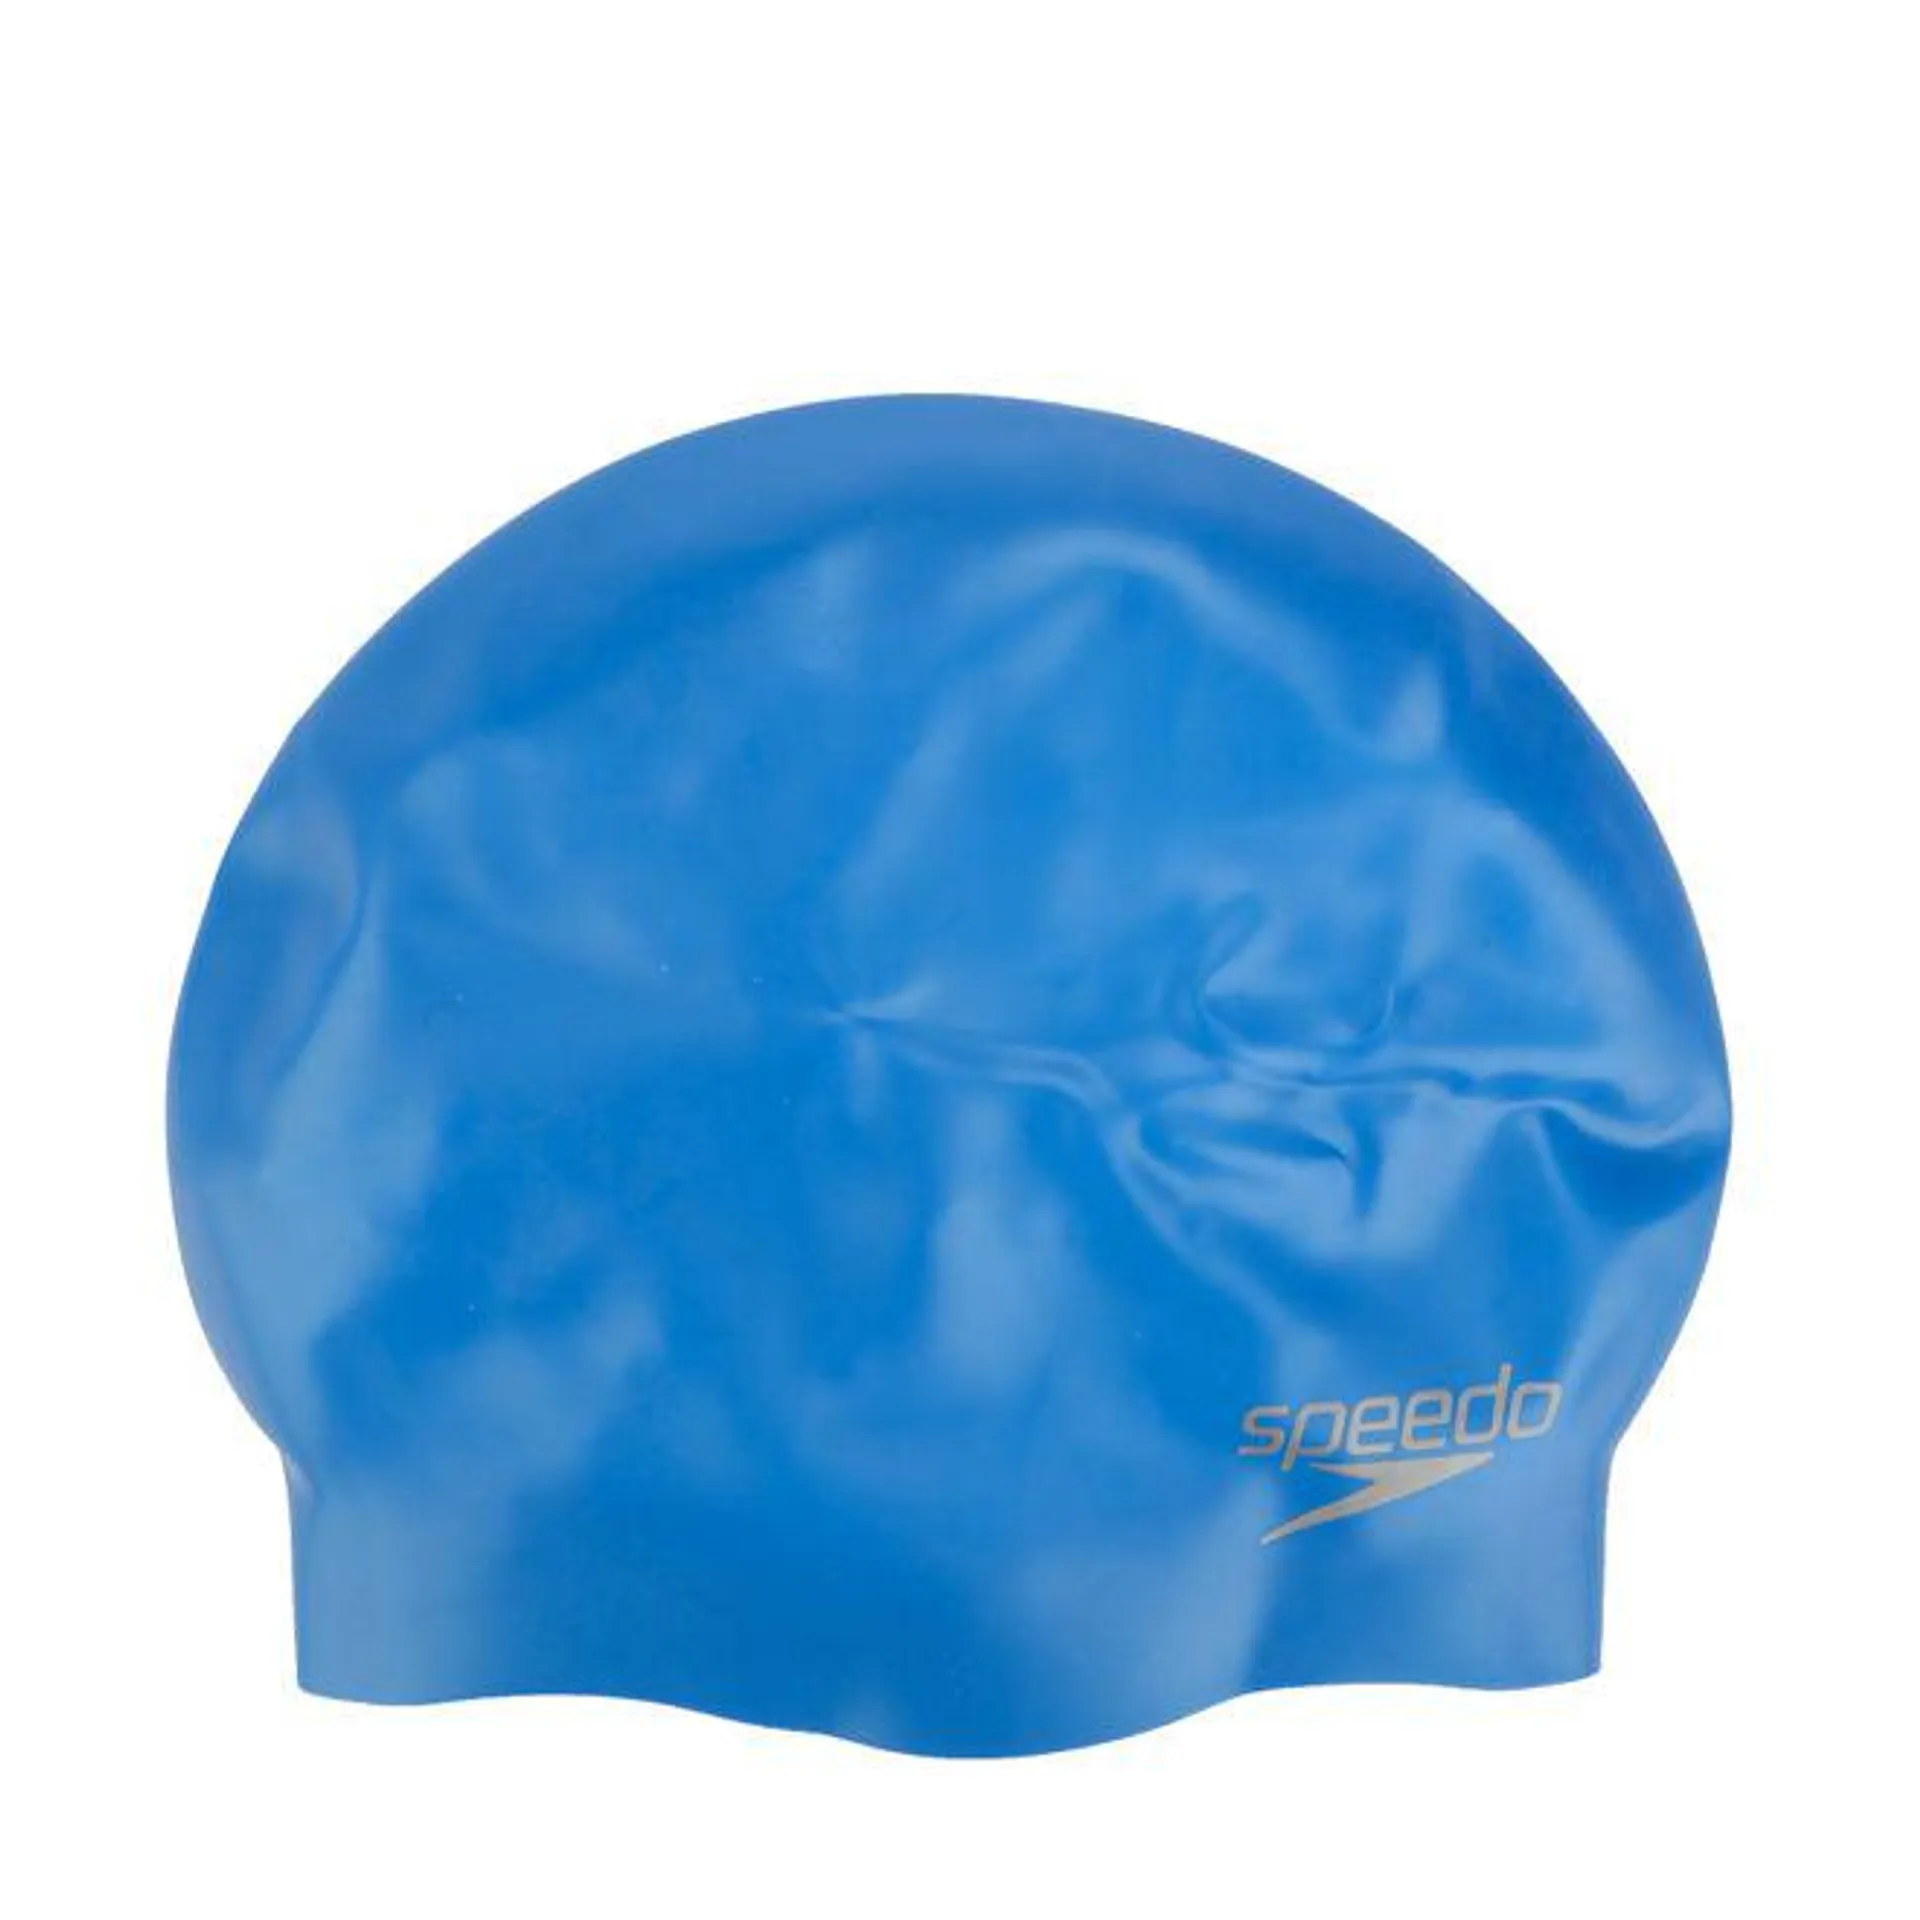 Speedo Plain Moulded Silicone Cap in Blue